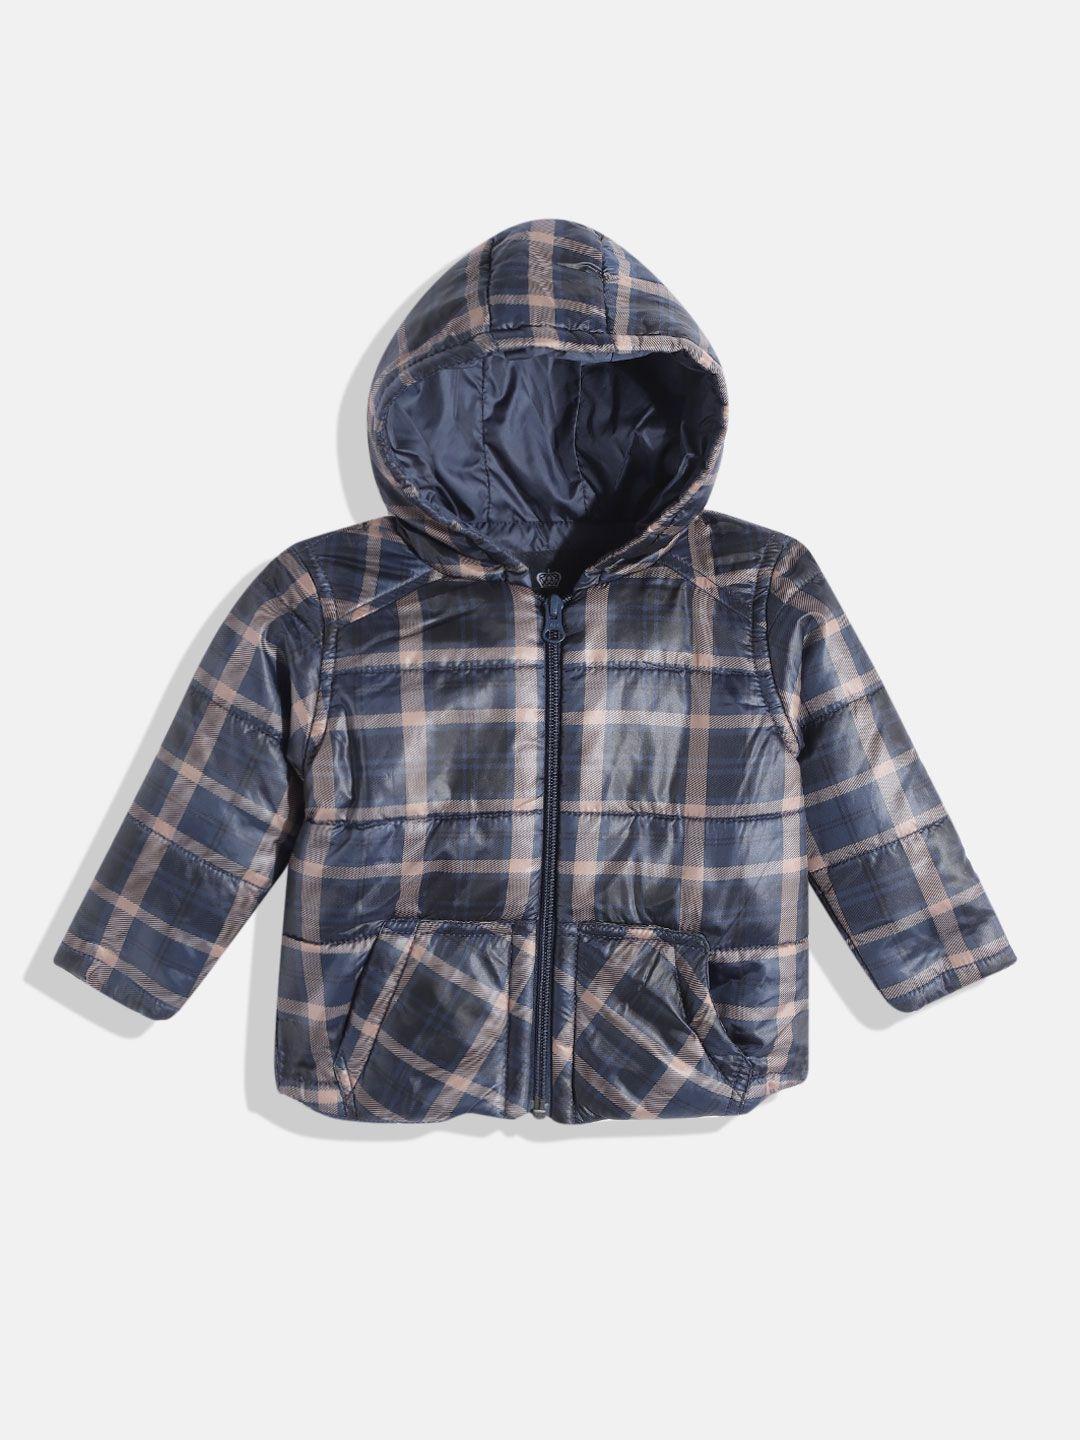 wingsfield boys navy blue & taupe checked padded jacket